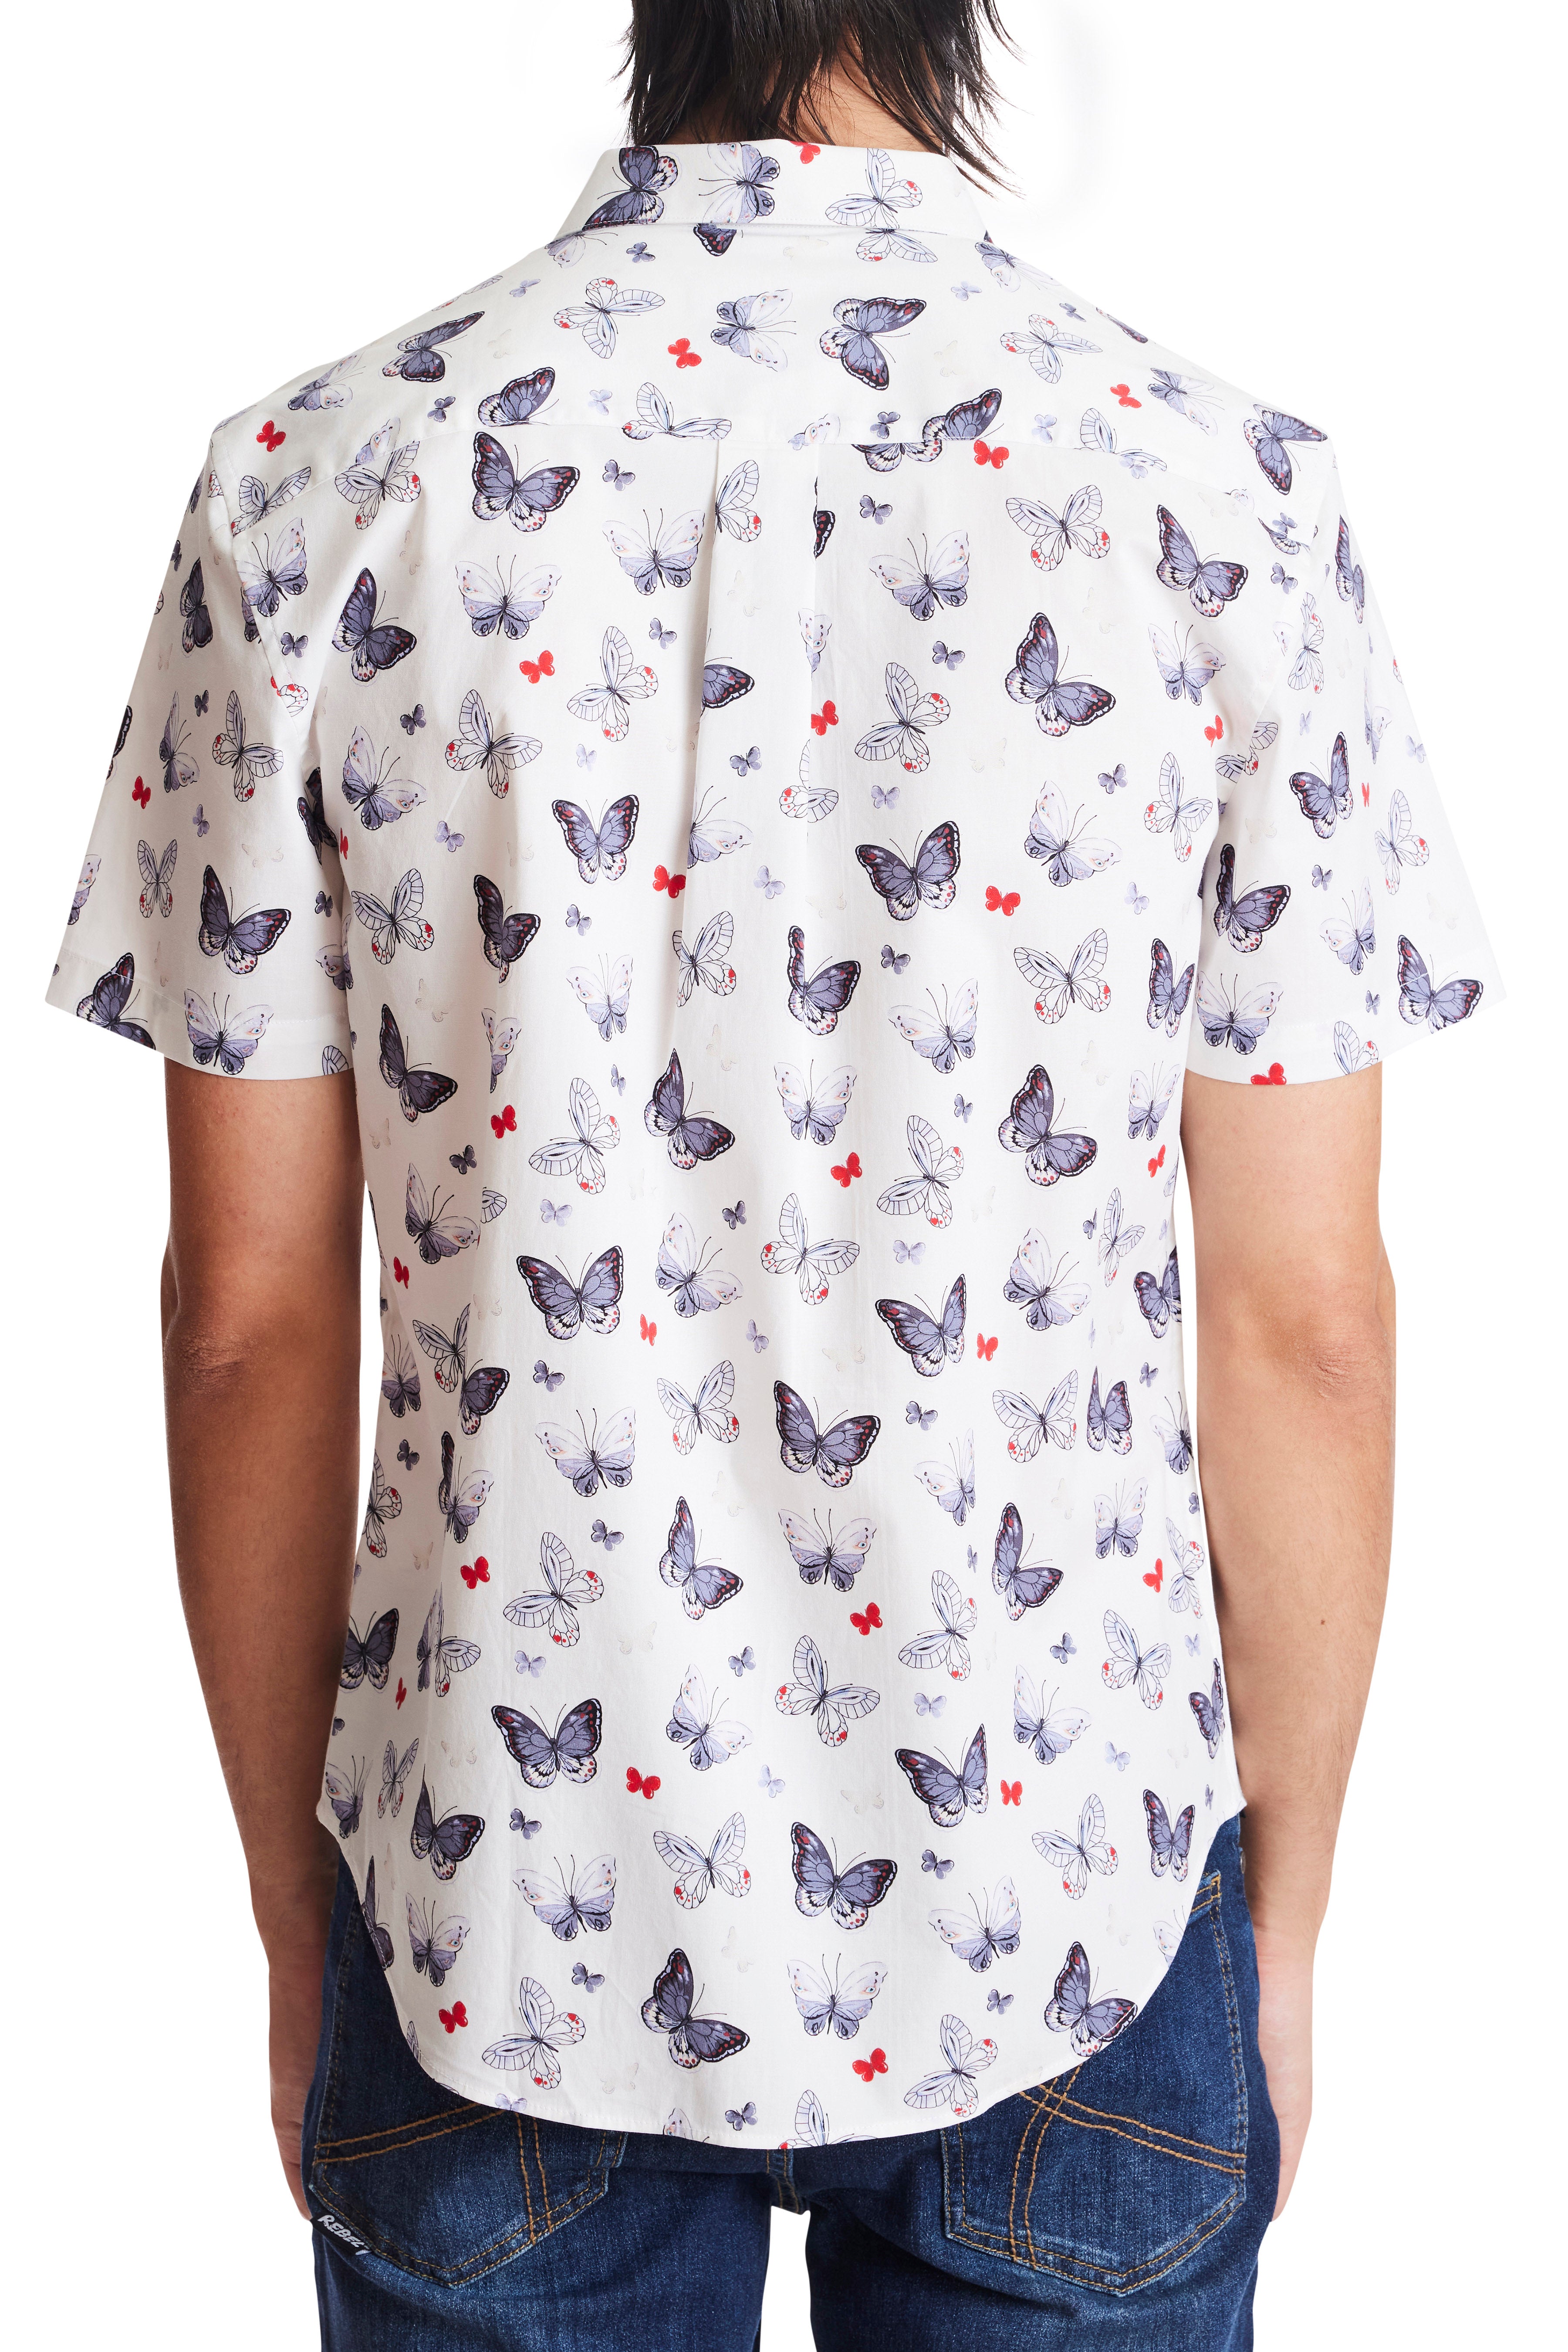 Soleil S/S Shirt - White Grey Butterfly